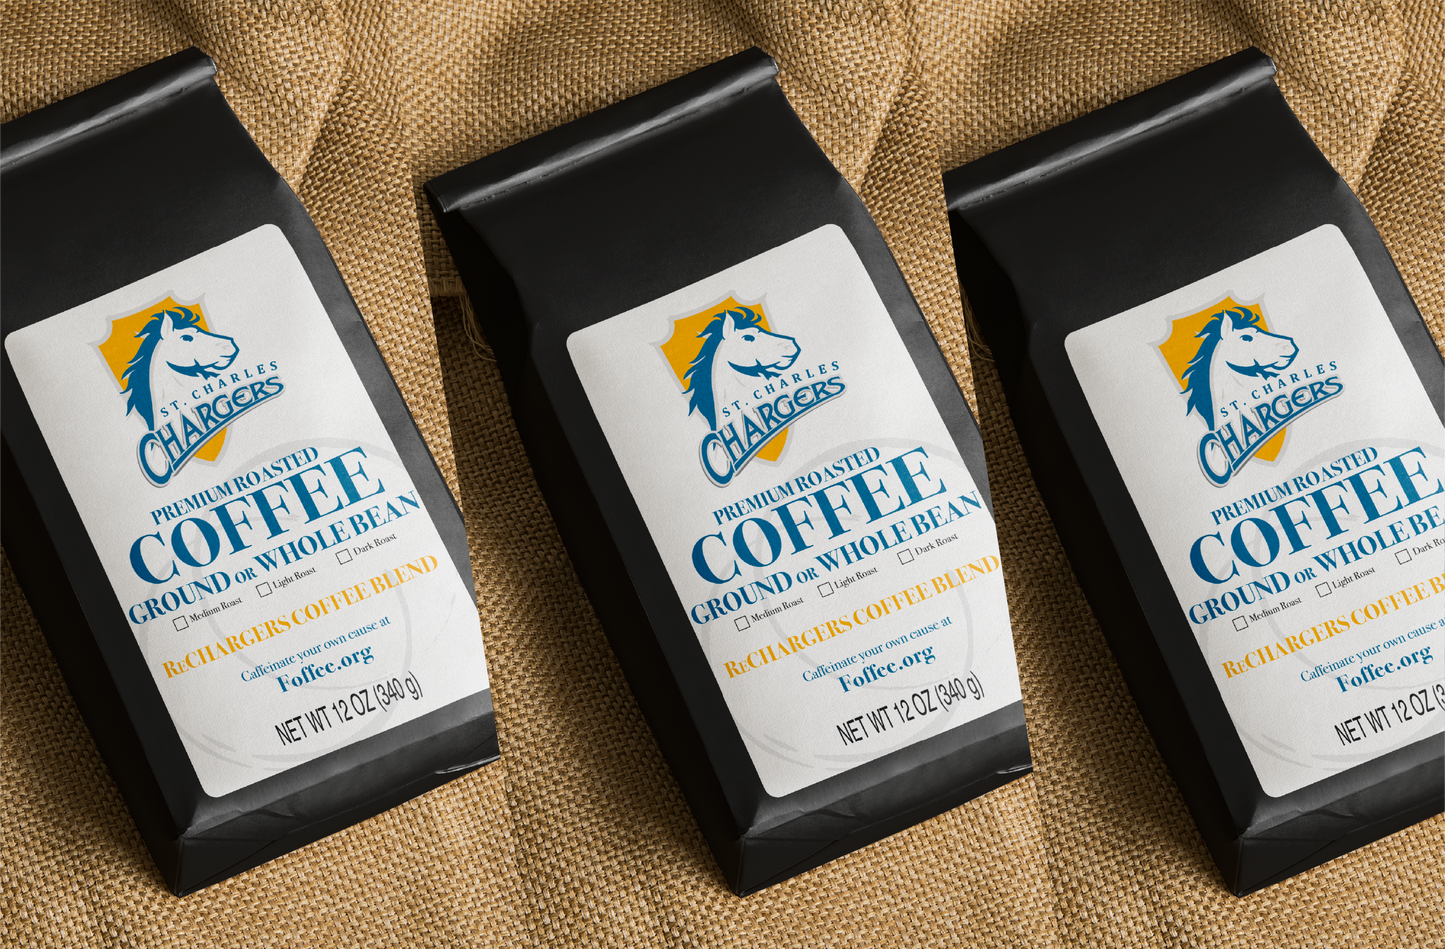 Pack 4: 3 bags ReCHARGERS Coffee Blend